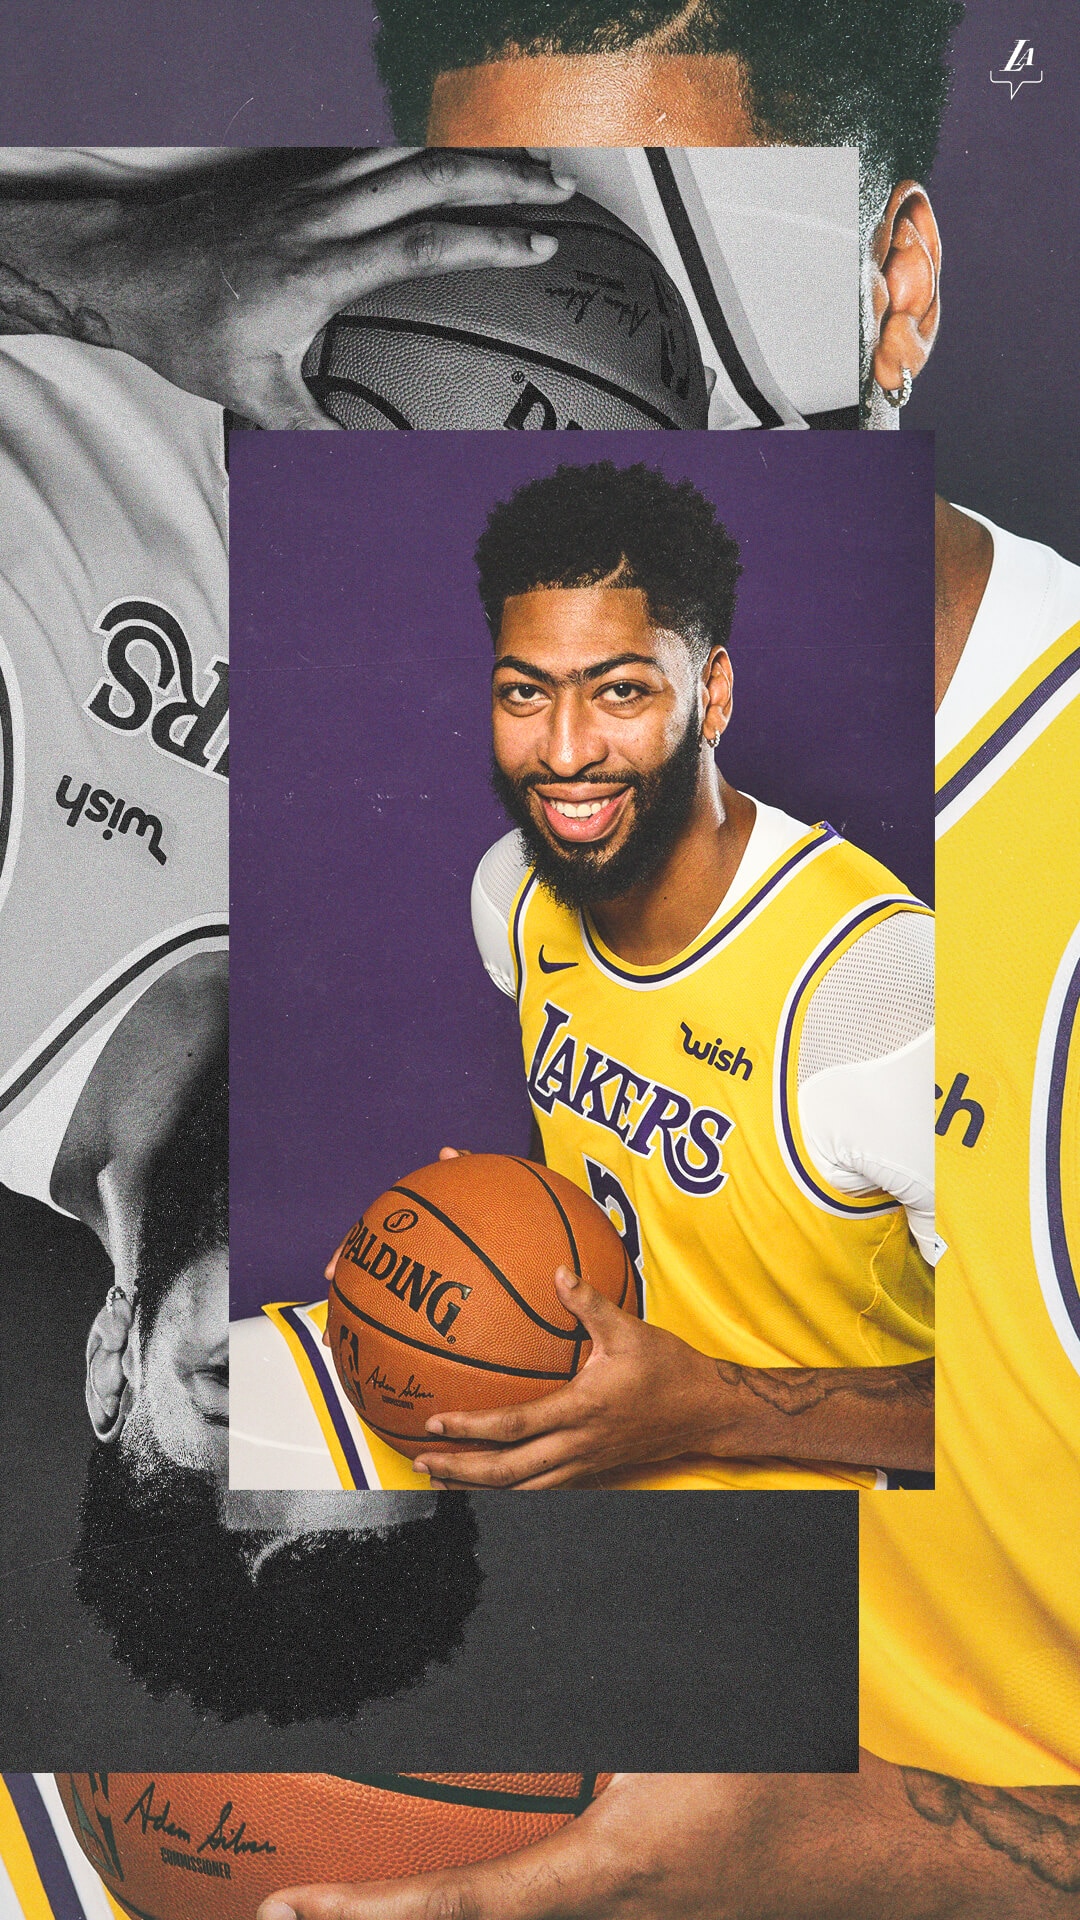 Lakers Wallpapers and Infographics Los Angeles Lakers